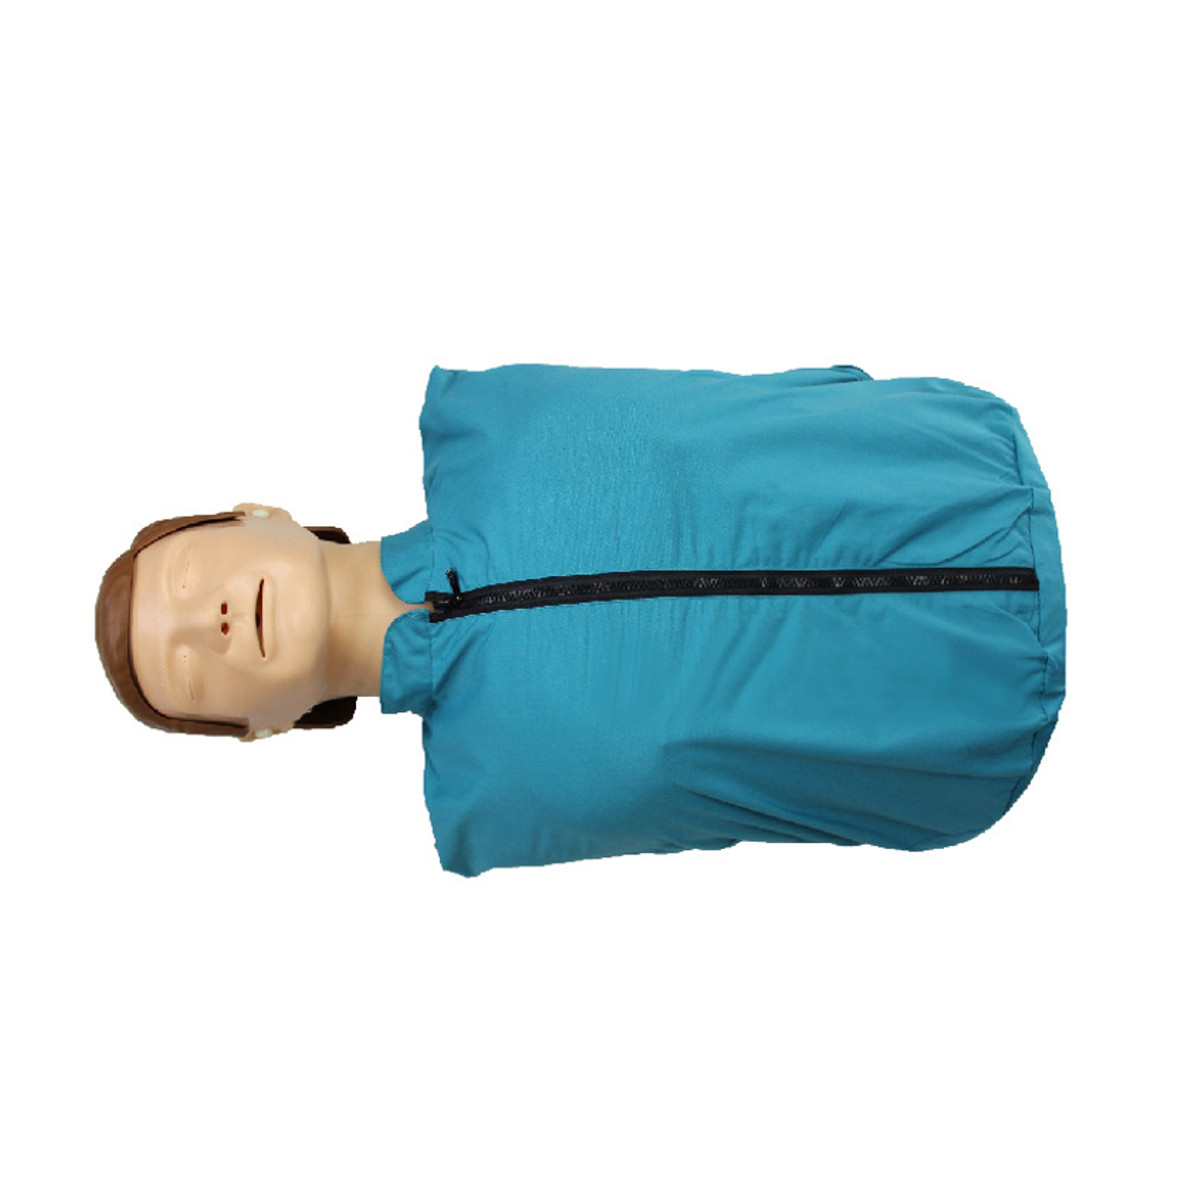 CPR-Adult-Manikin-AED-First-Aid-Training-Dummy-Training-Medical-Model-Respiration-Human-1545480-2